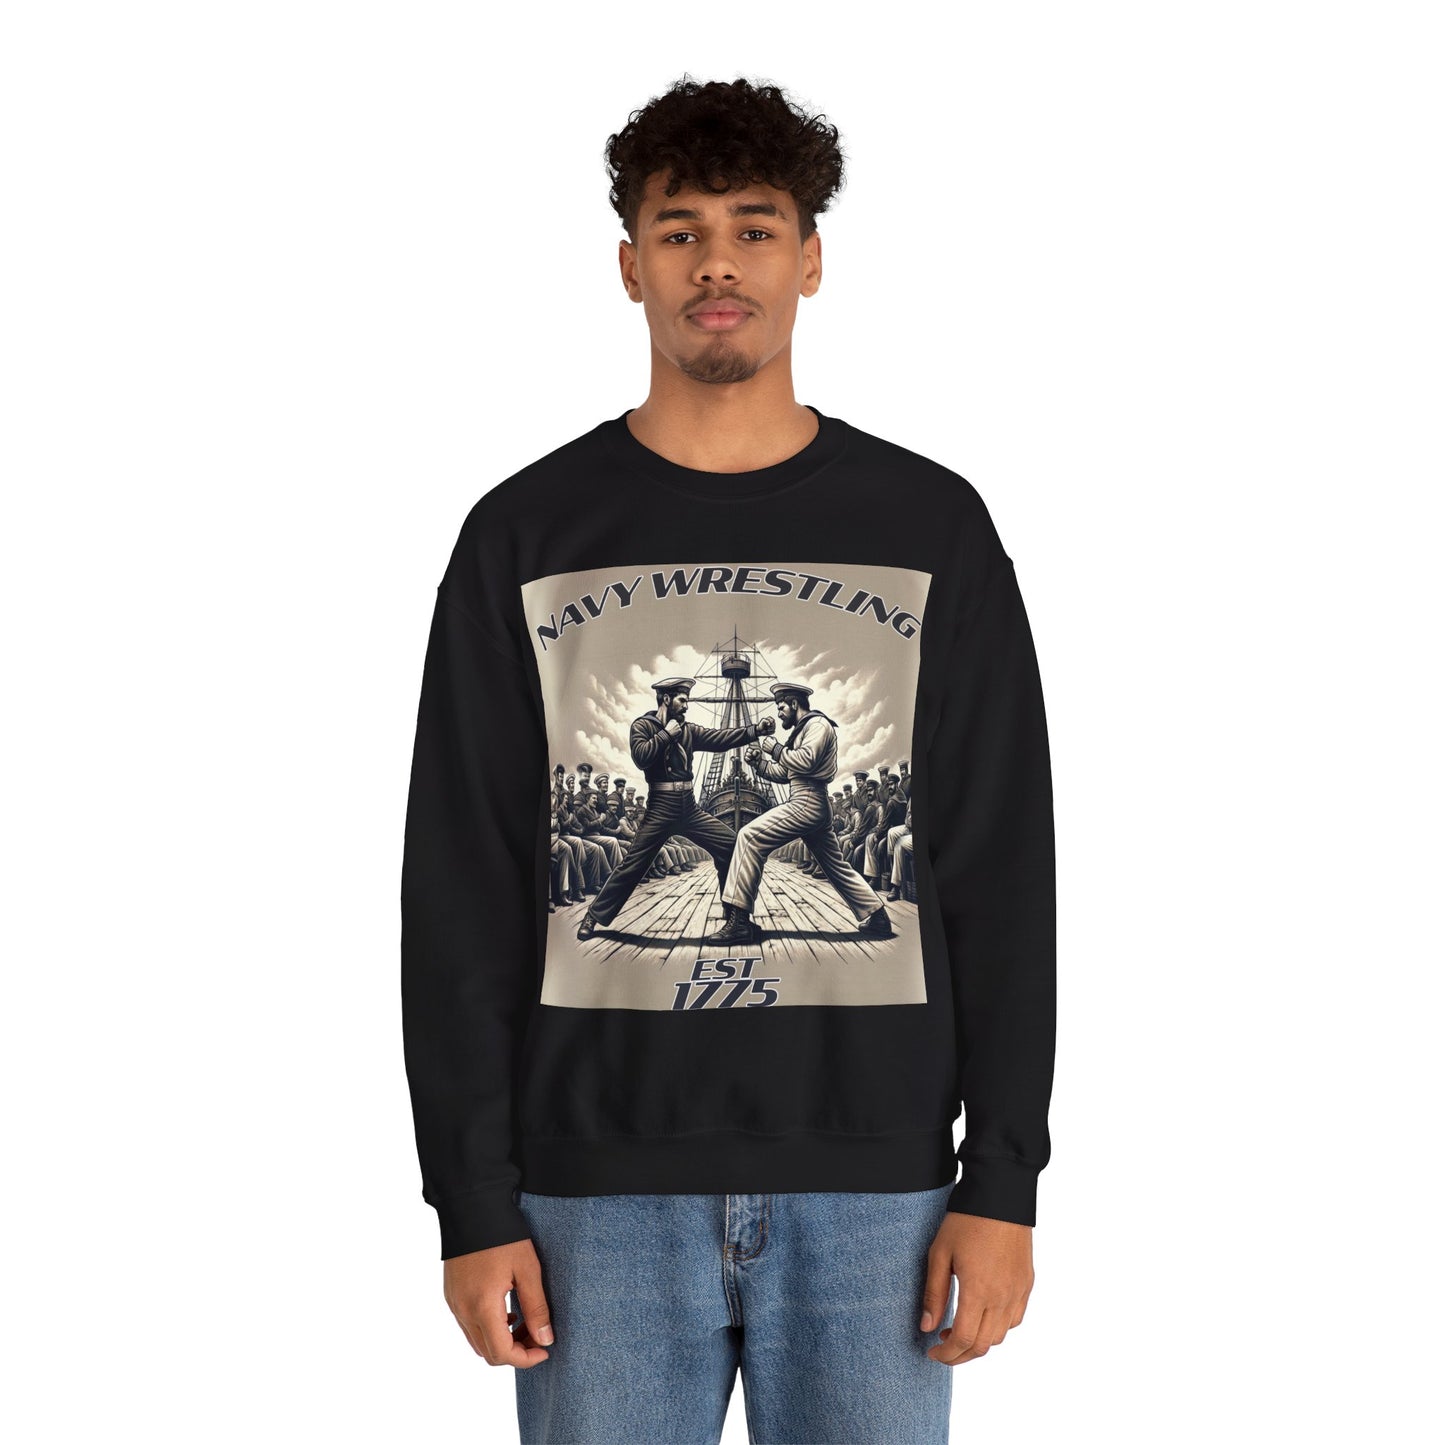 🎖️ **Limited Edition Navy Wrestling Crew Neck Sweater** 🌊